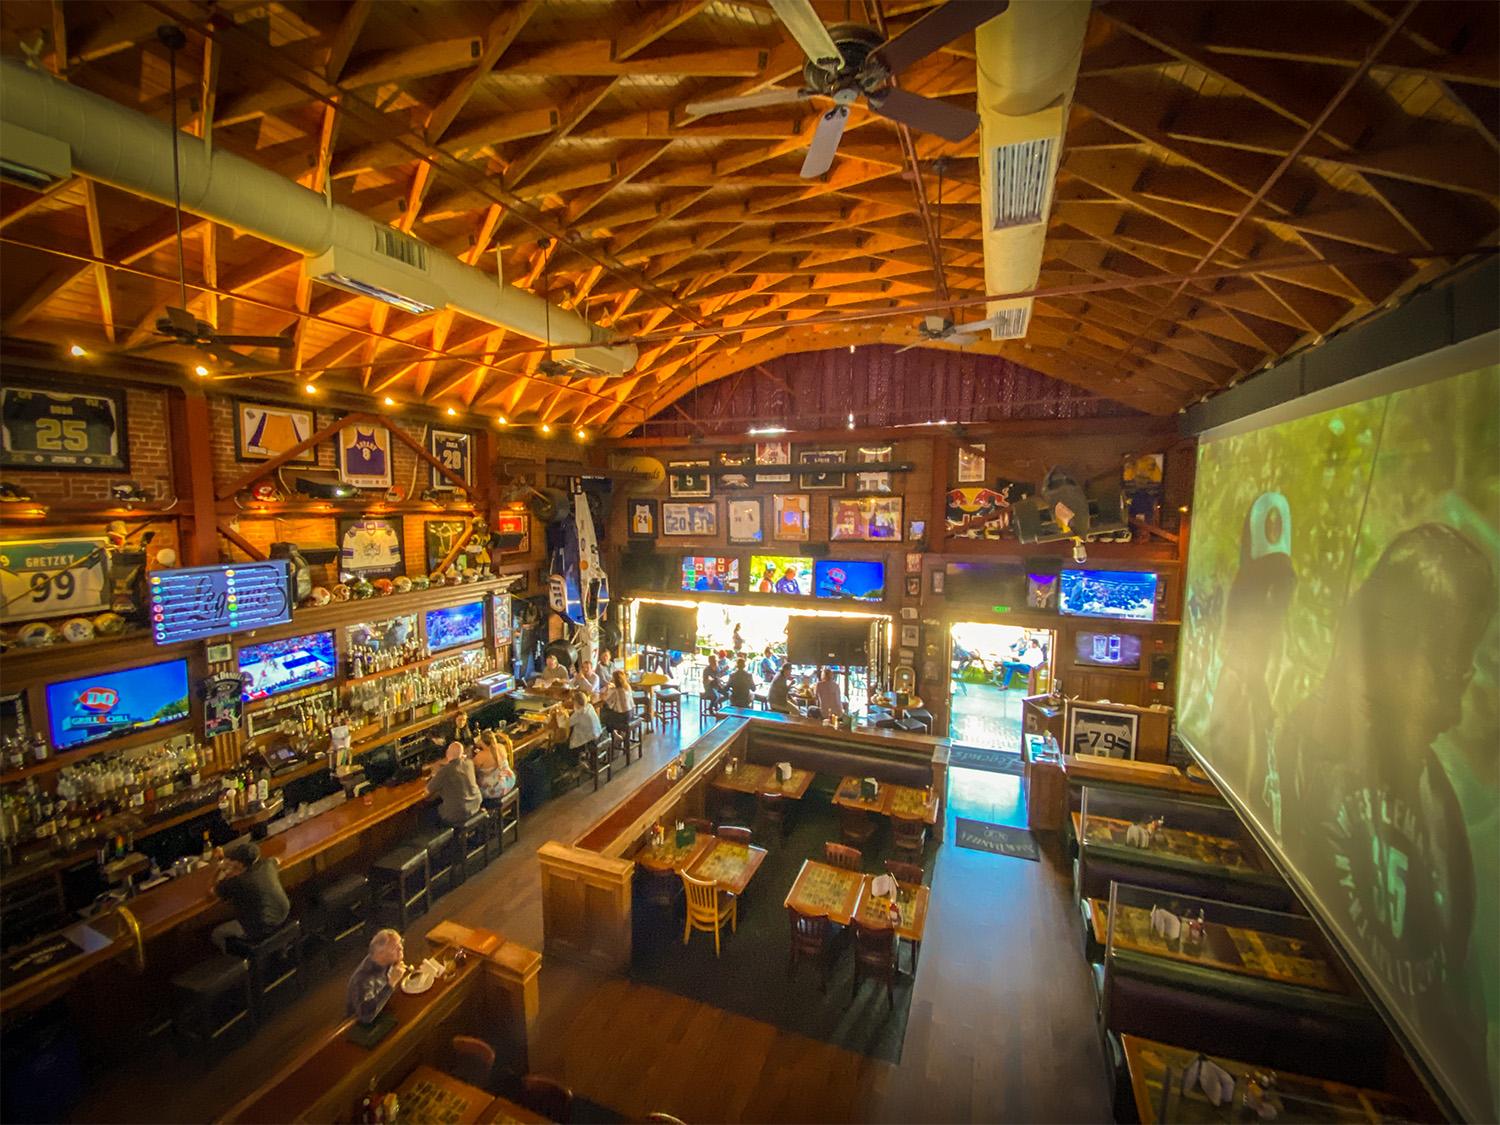 Over four decades in, Legends is the legend that brought the sports bar to  Long Beach - LB Living